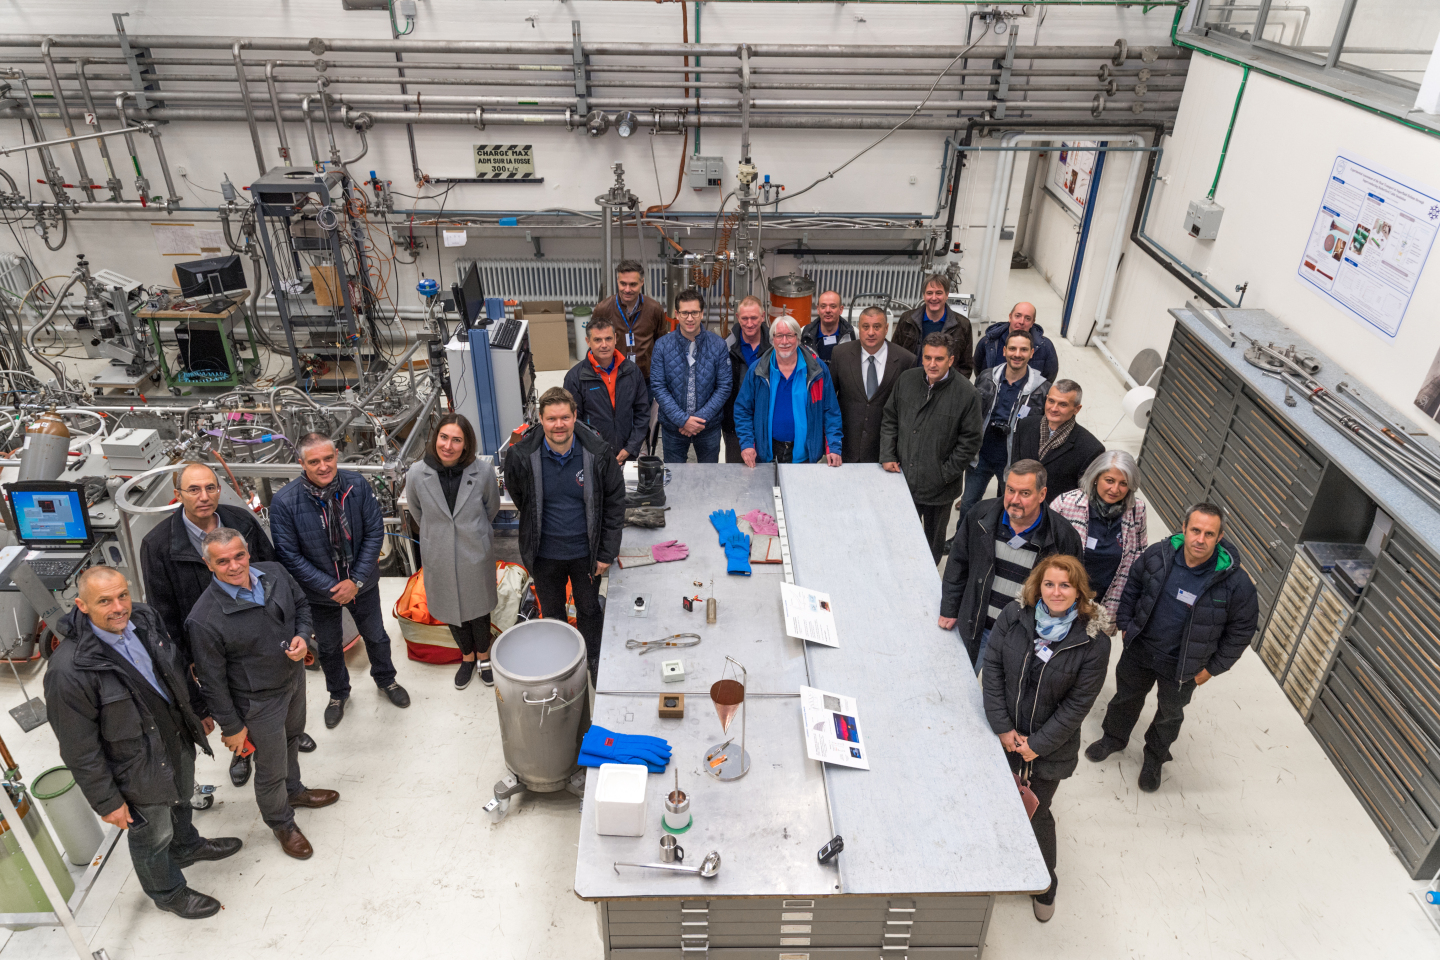 CERN hosts major international fire and rescue meeting